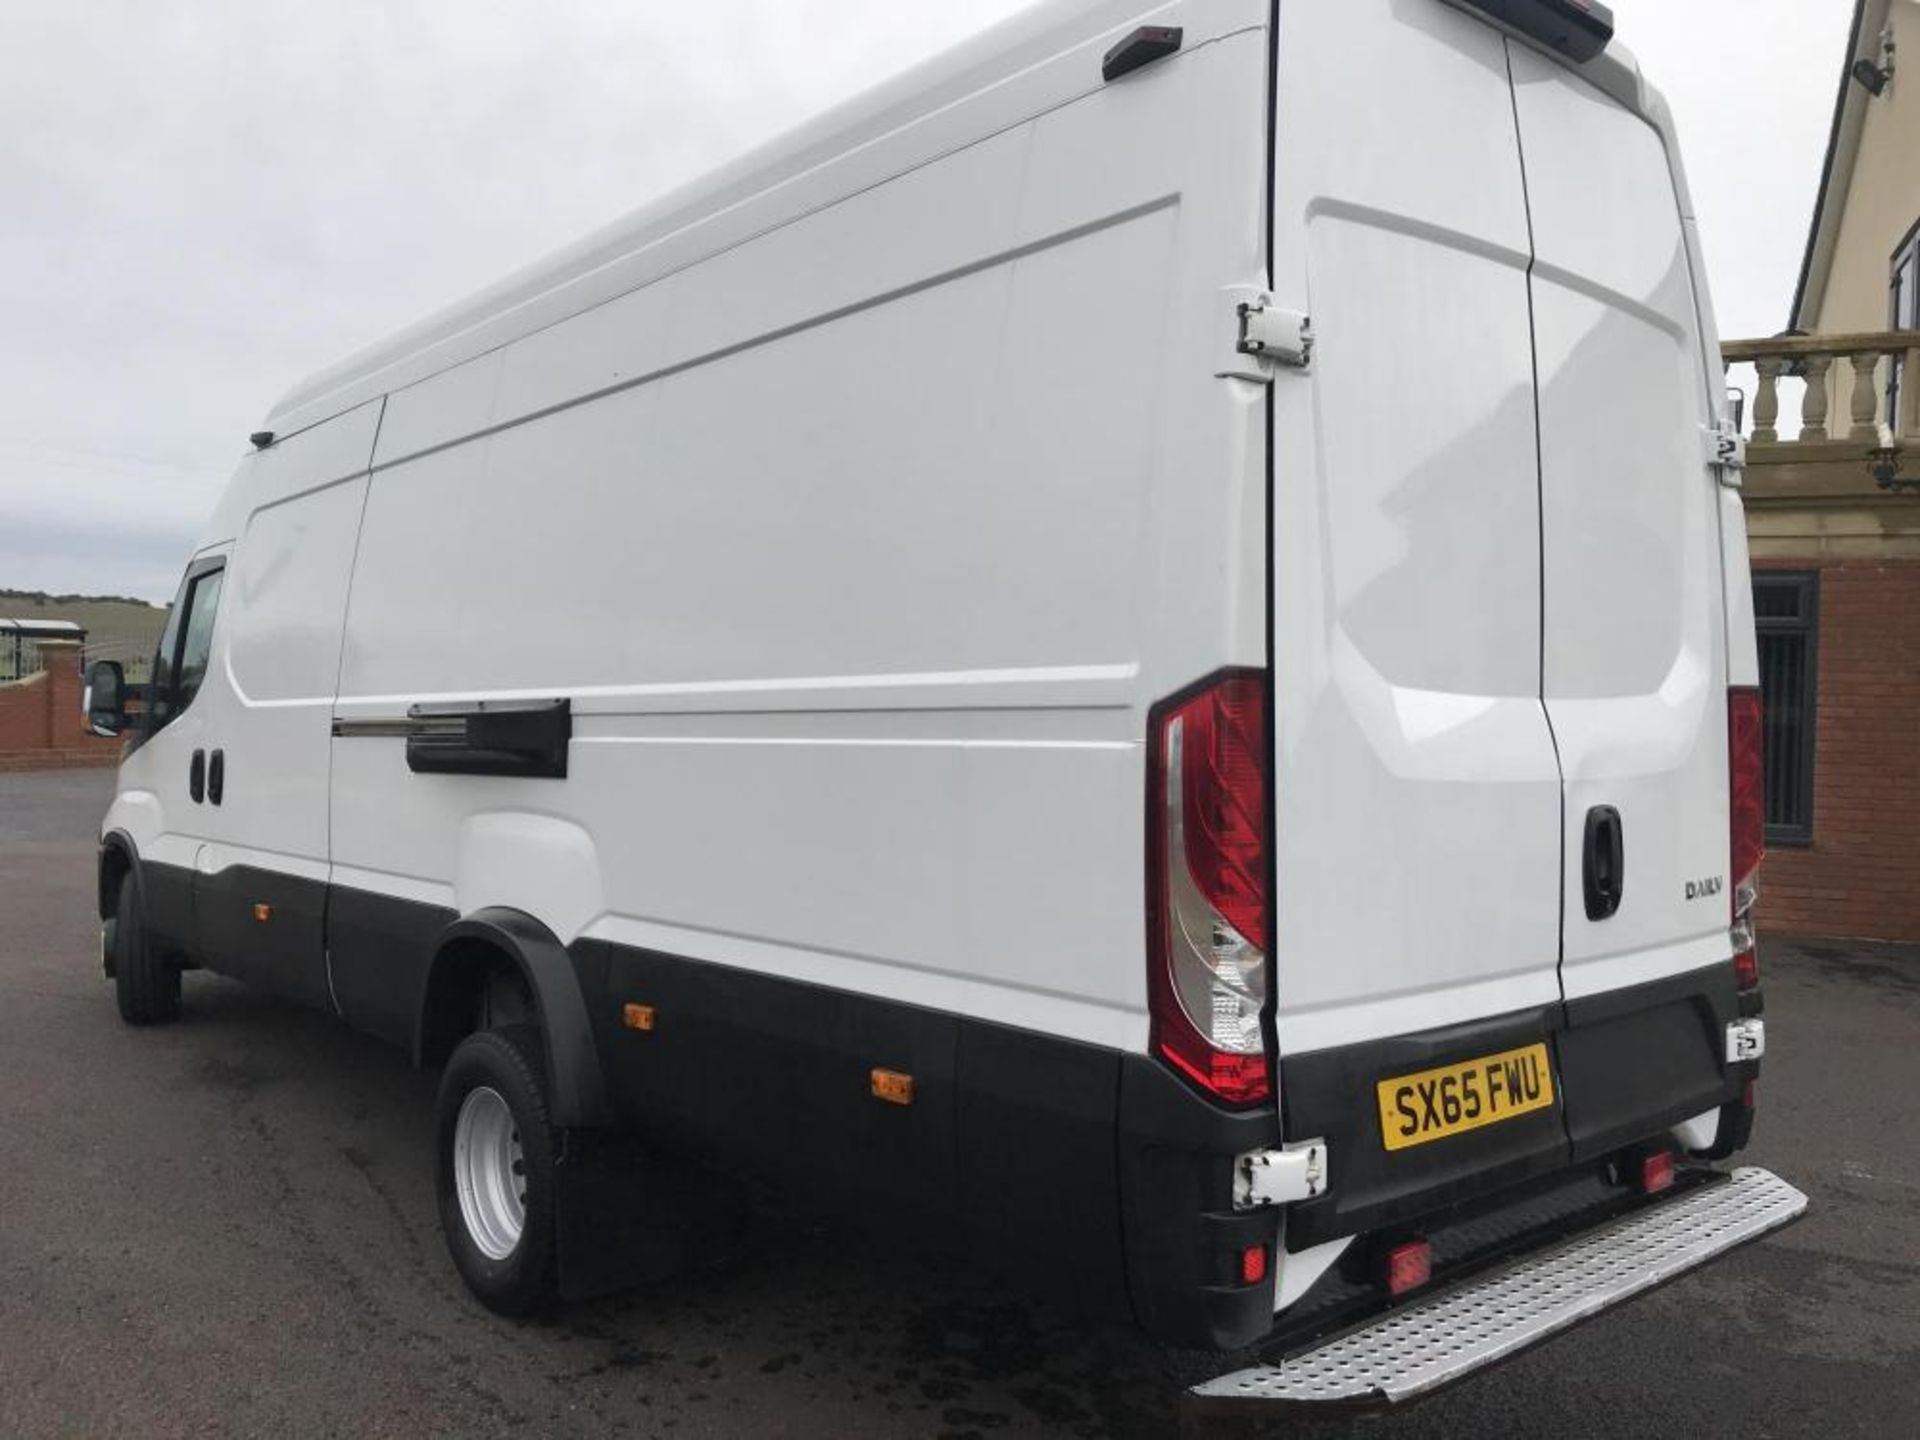 2016/65 REG IVECO DAILY 70C17 7 TON GROSS LWB REFRIGERATED 3.0 DIESEL PANEL VAN, 0 FORMER KEEPERS - Image 3 of 16